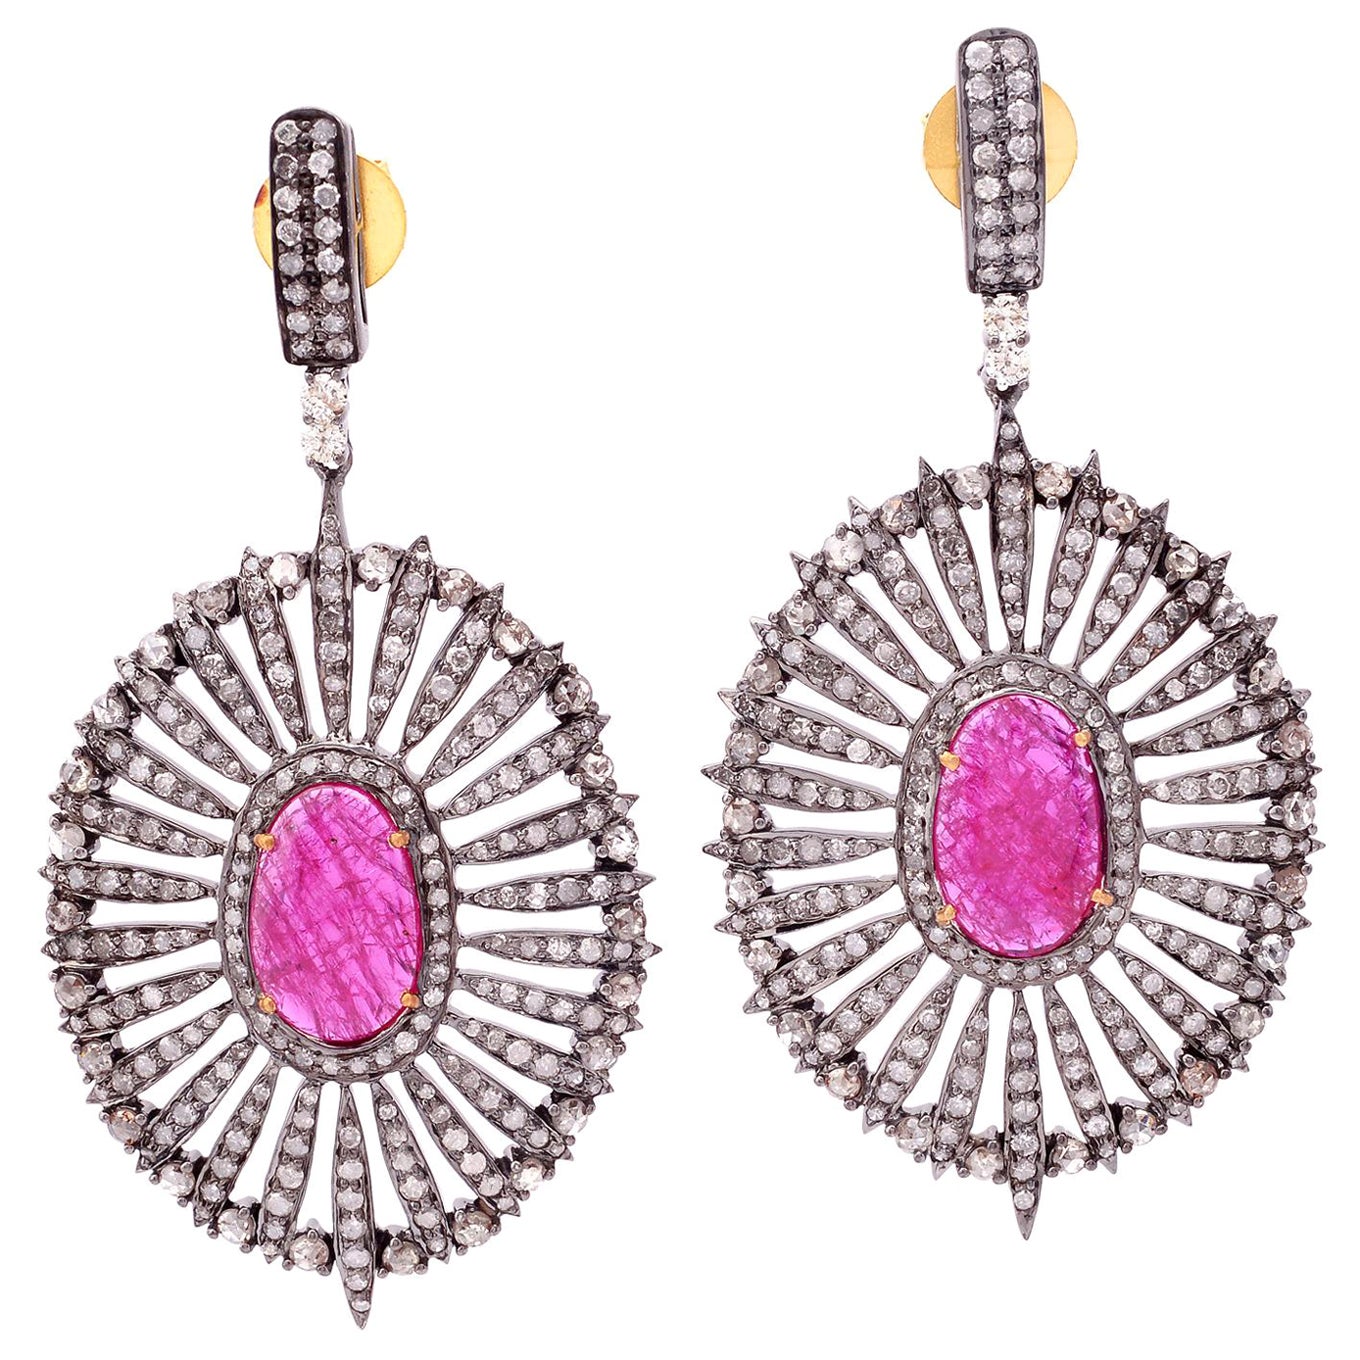 Oval Shaped Ruby Sunburst Earrings with Pave Diamonds In 18k Gold & Silver